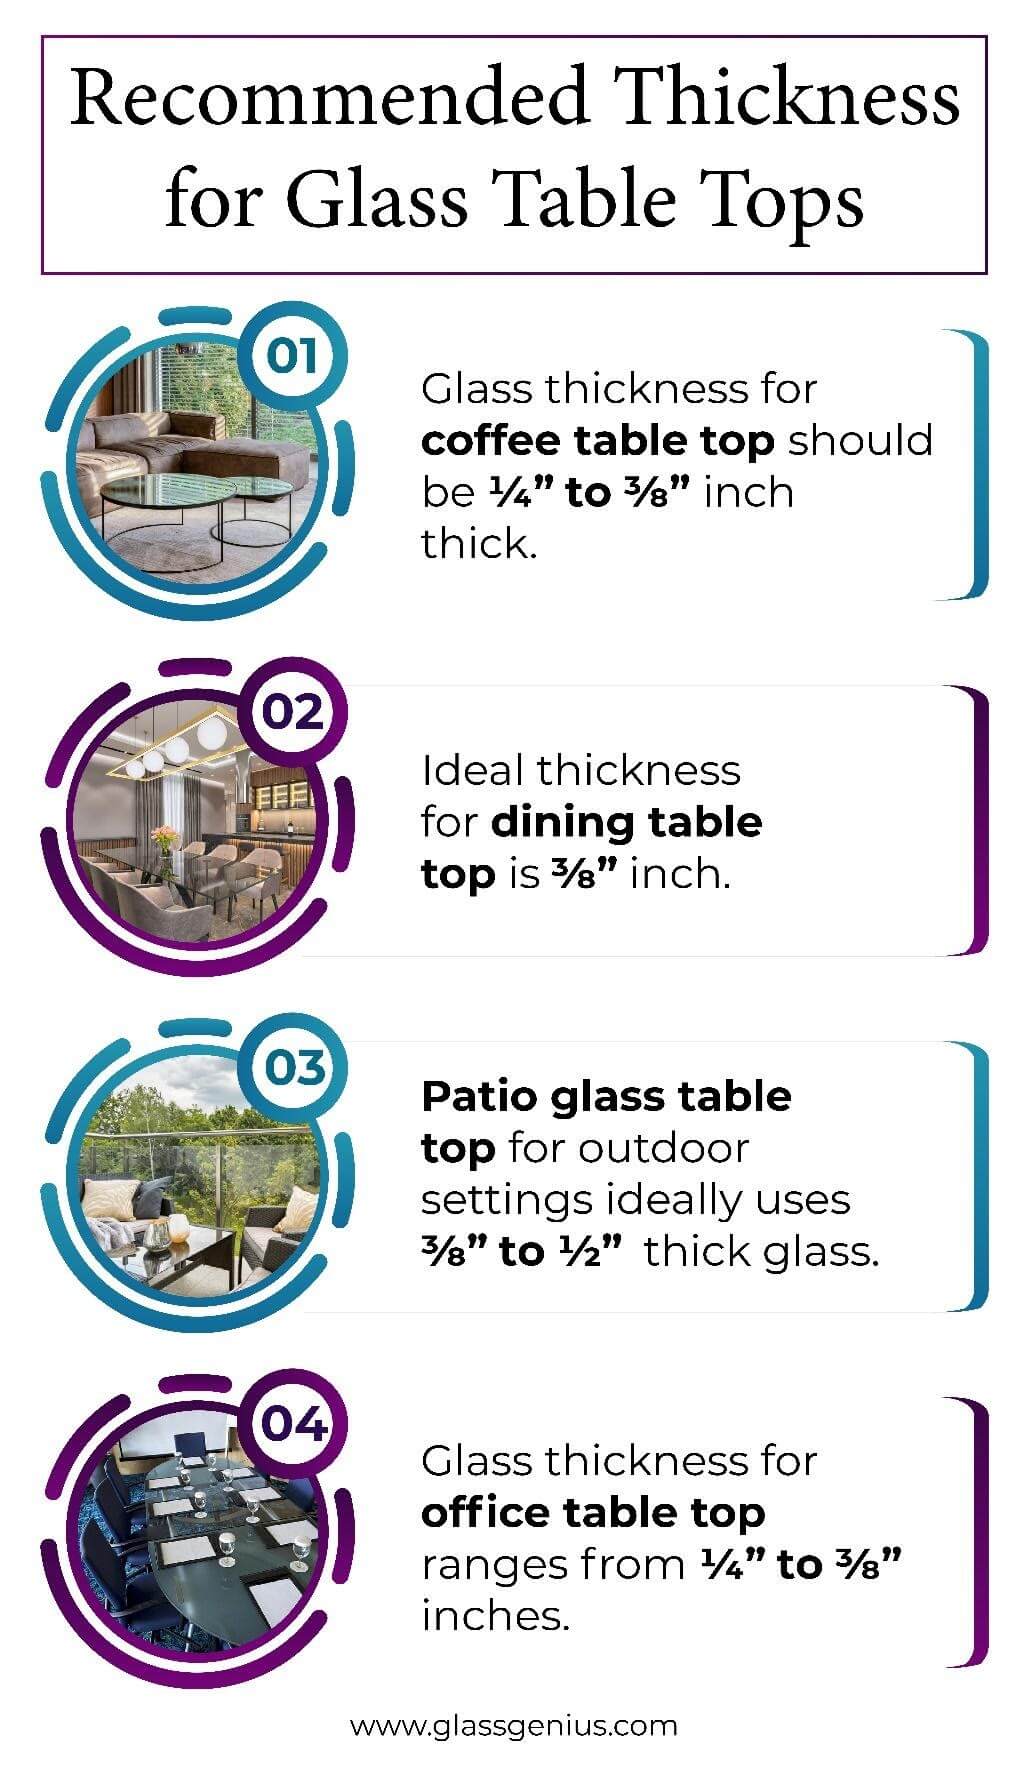 How Thick Glass Should Be?